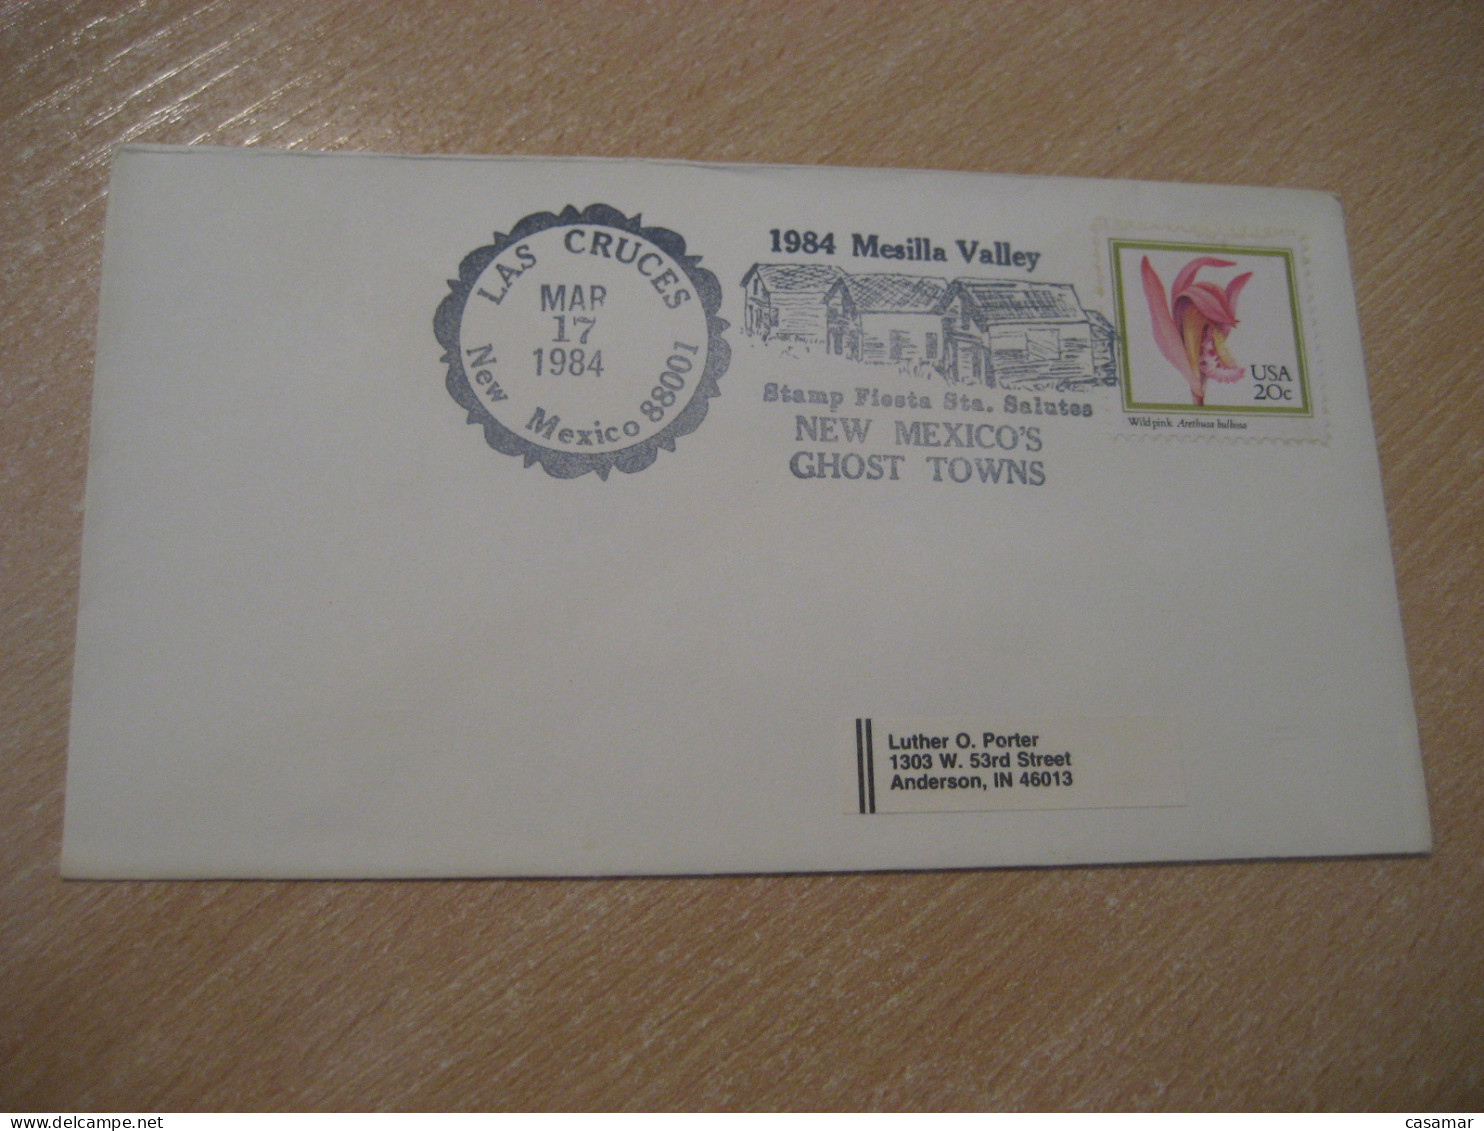 LAS CRUCES 1984 Mesilla Valley New Mexico Ghost Towns American Indians Indian Cancel Cover USA Indigenous Native History - Indianen